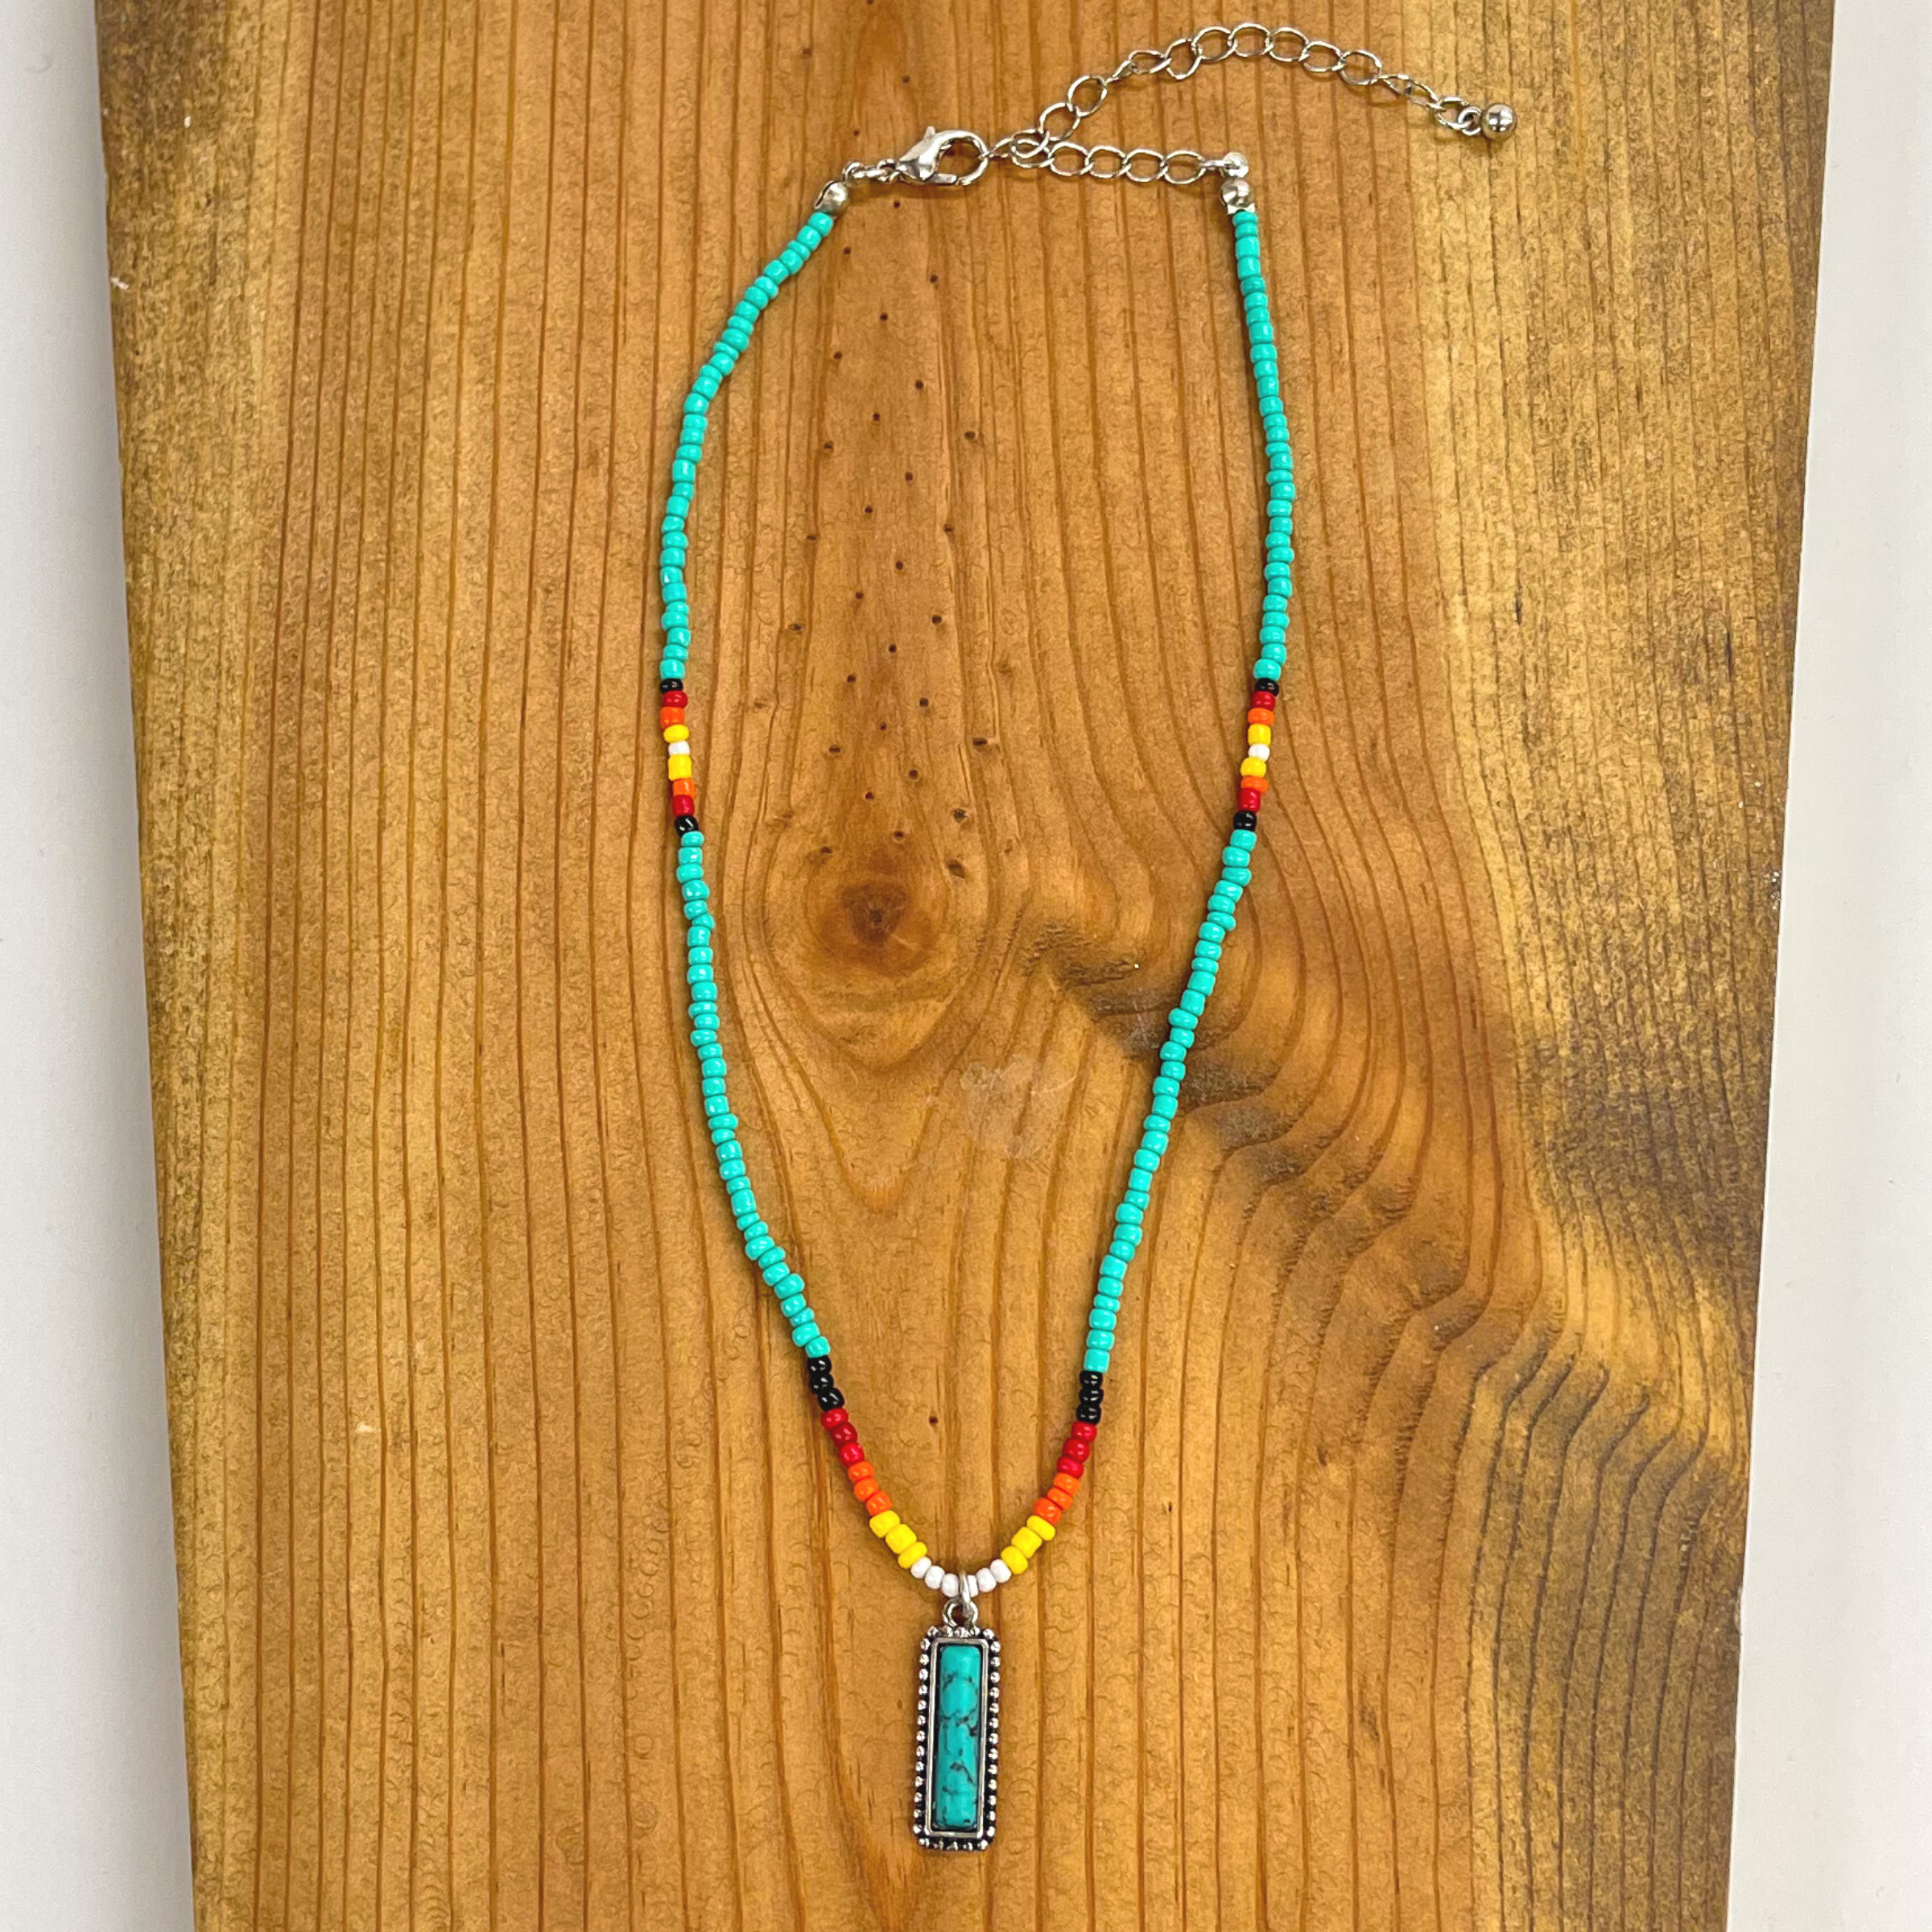 Seed Beaded Choker Necklace with Faux Turquoise Stone Bar Pendant in Turquoise - Giddy Up Glamour Boutique